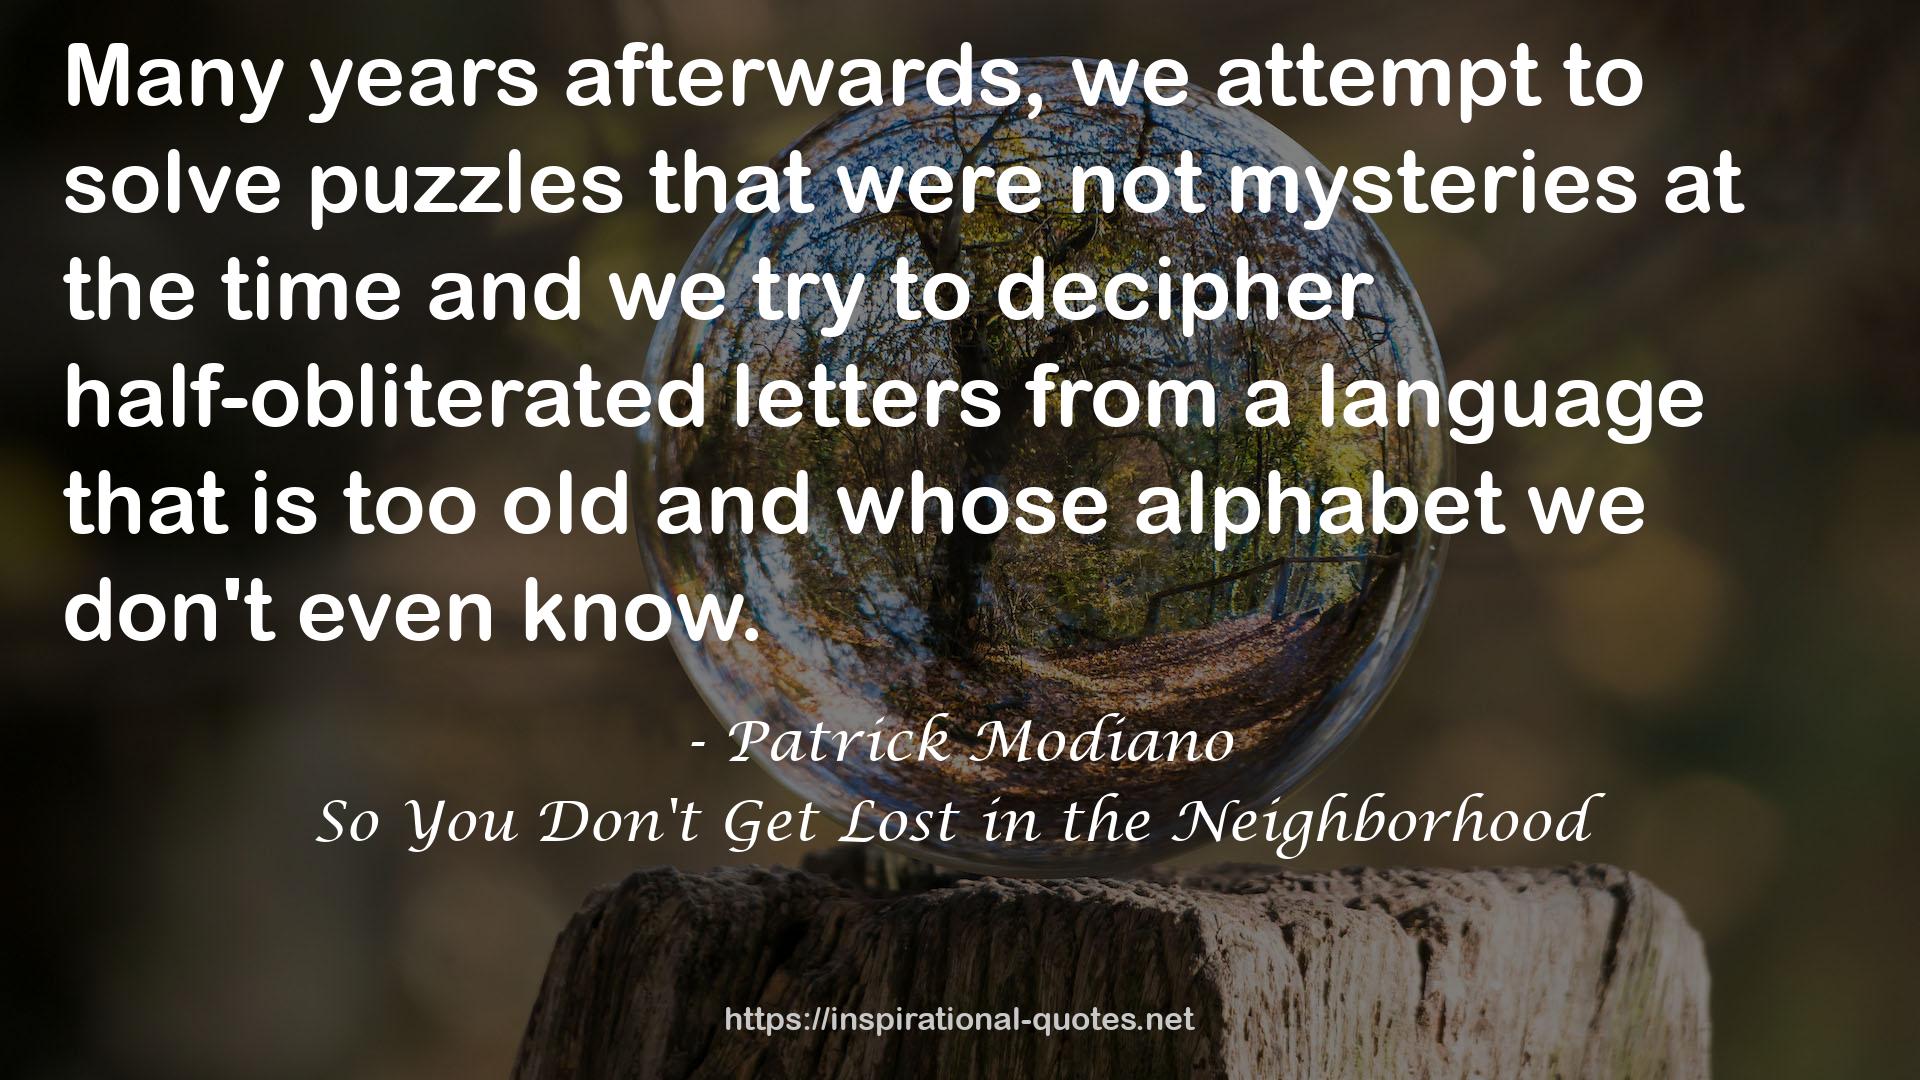 So You Don't Get Lost in the Neighborhood QUOTES